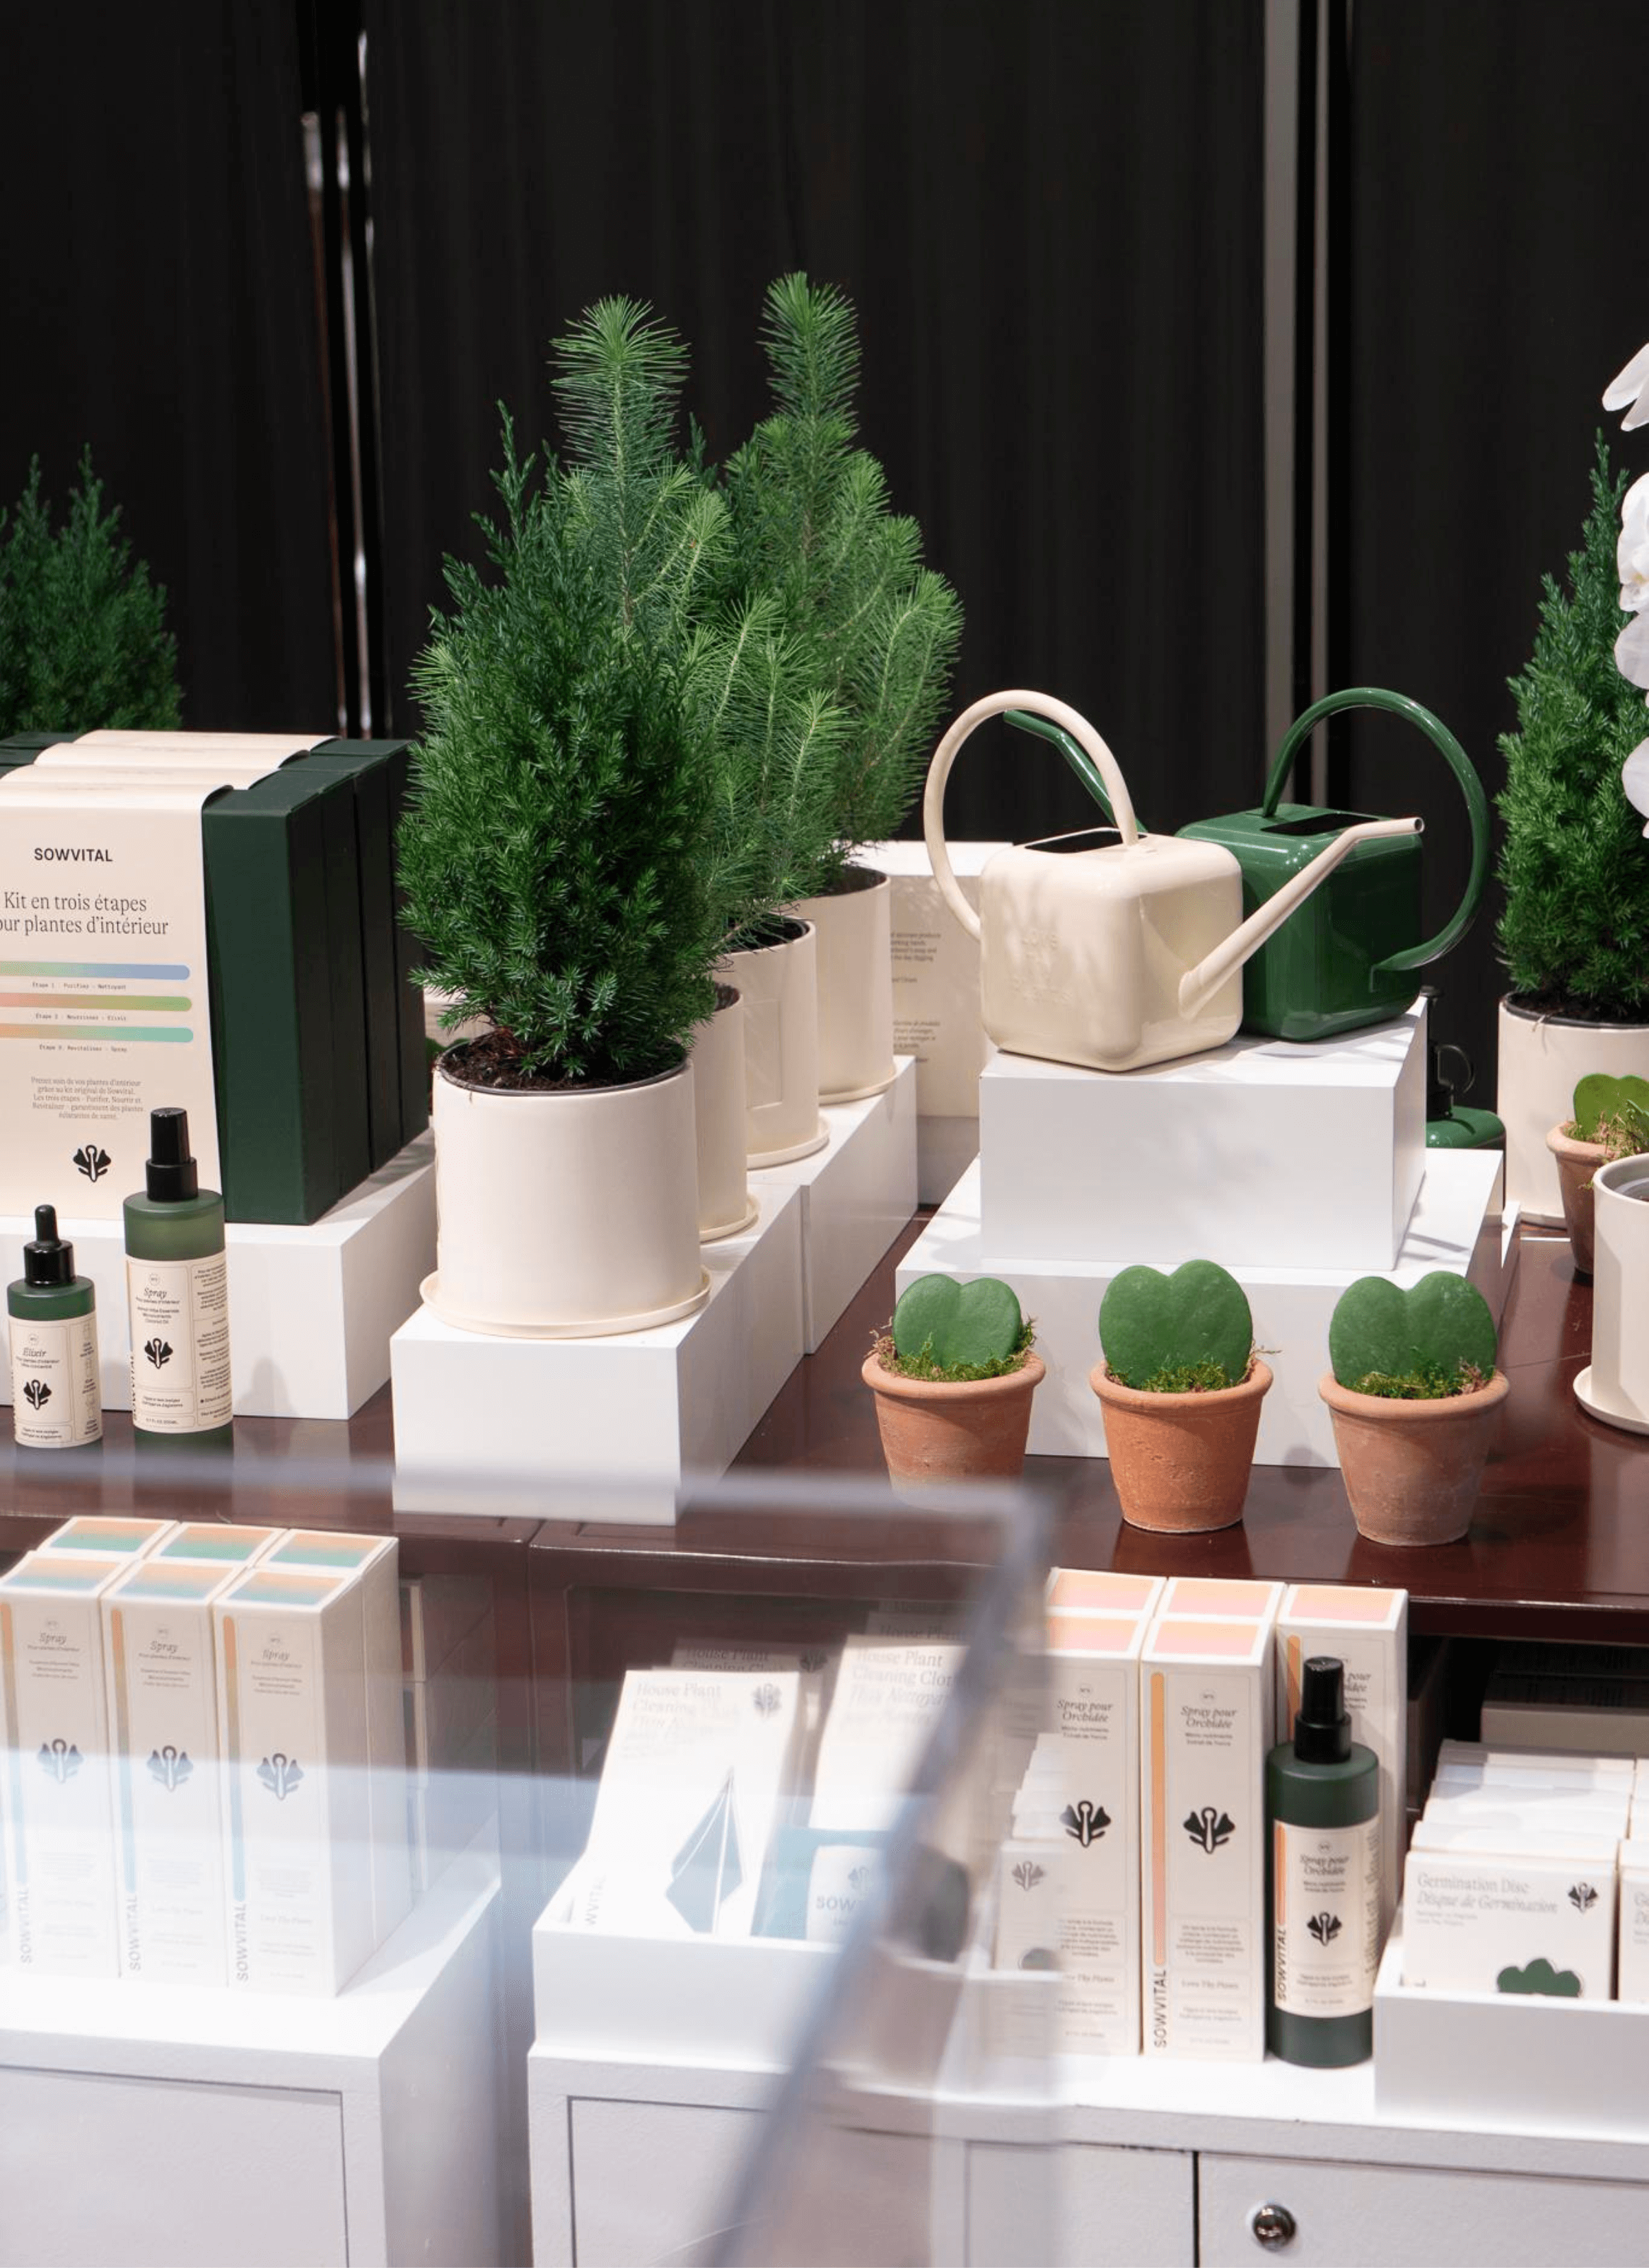 Sowvital products displayed in an open area surrounded by numerous potted plants serving as decorations.